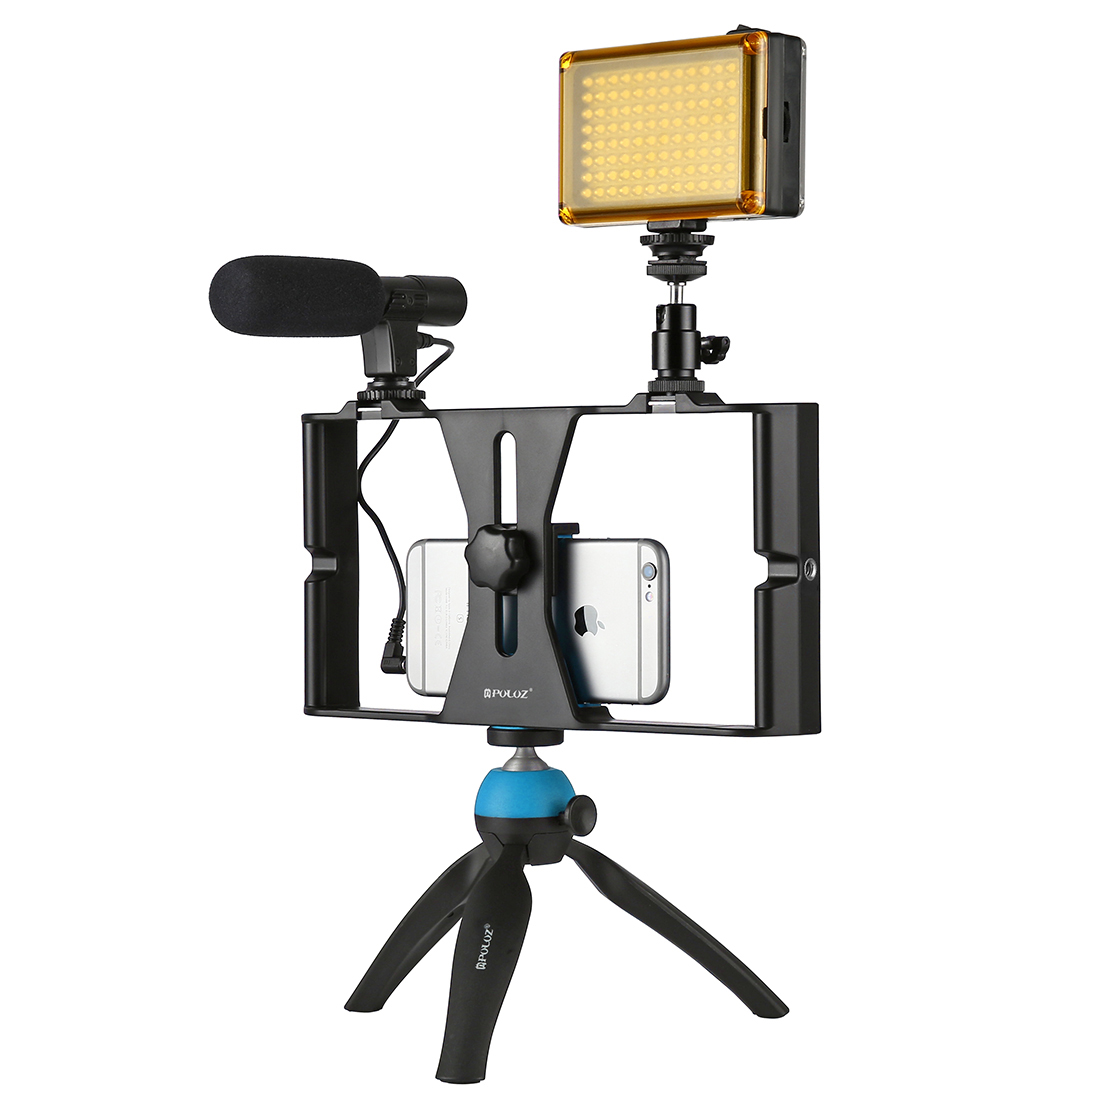 

PULUZ PKT3023 Smartphone Video Rig LED Studio Light Video Shotgun Microphone Mini Tripod Mount Kits with Cold Shoe Tripod Head for iPhone Galaxy Huawei Xiaomi for HTC for LG for Google Smartphones